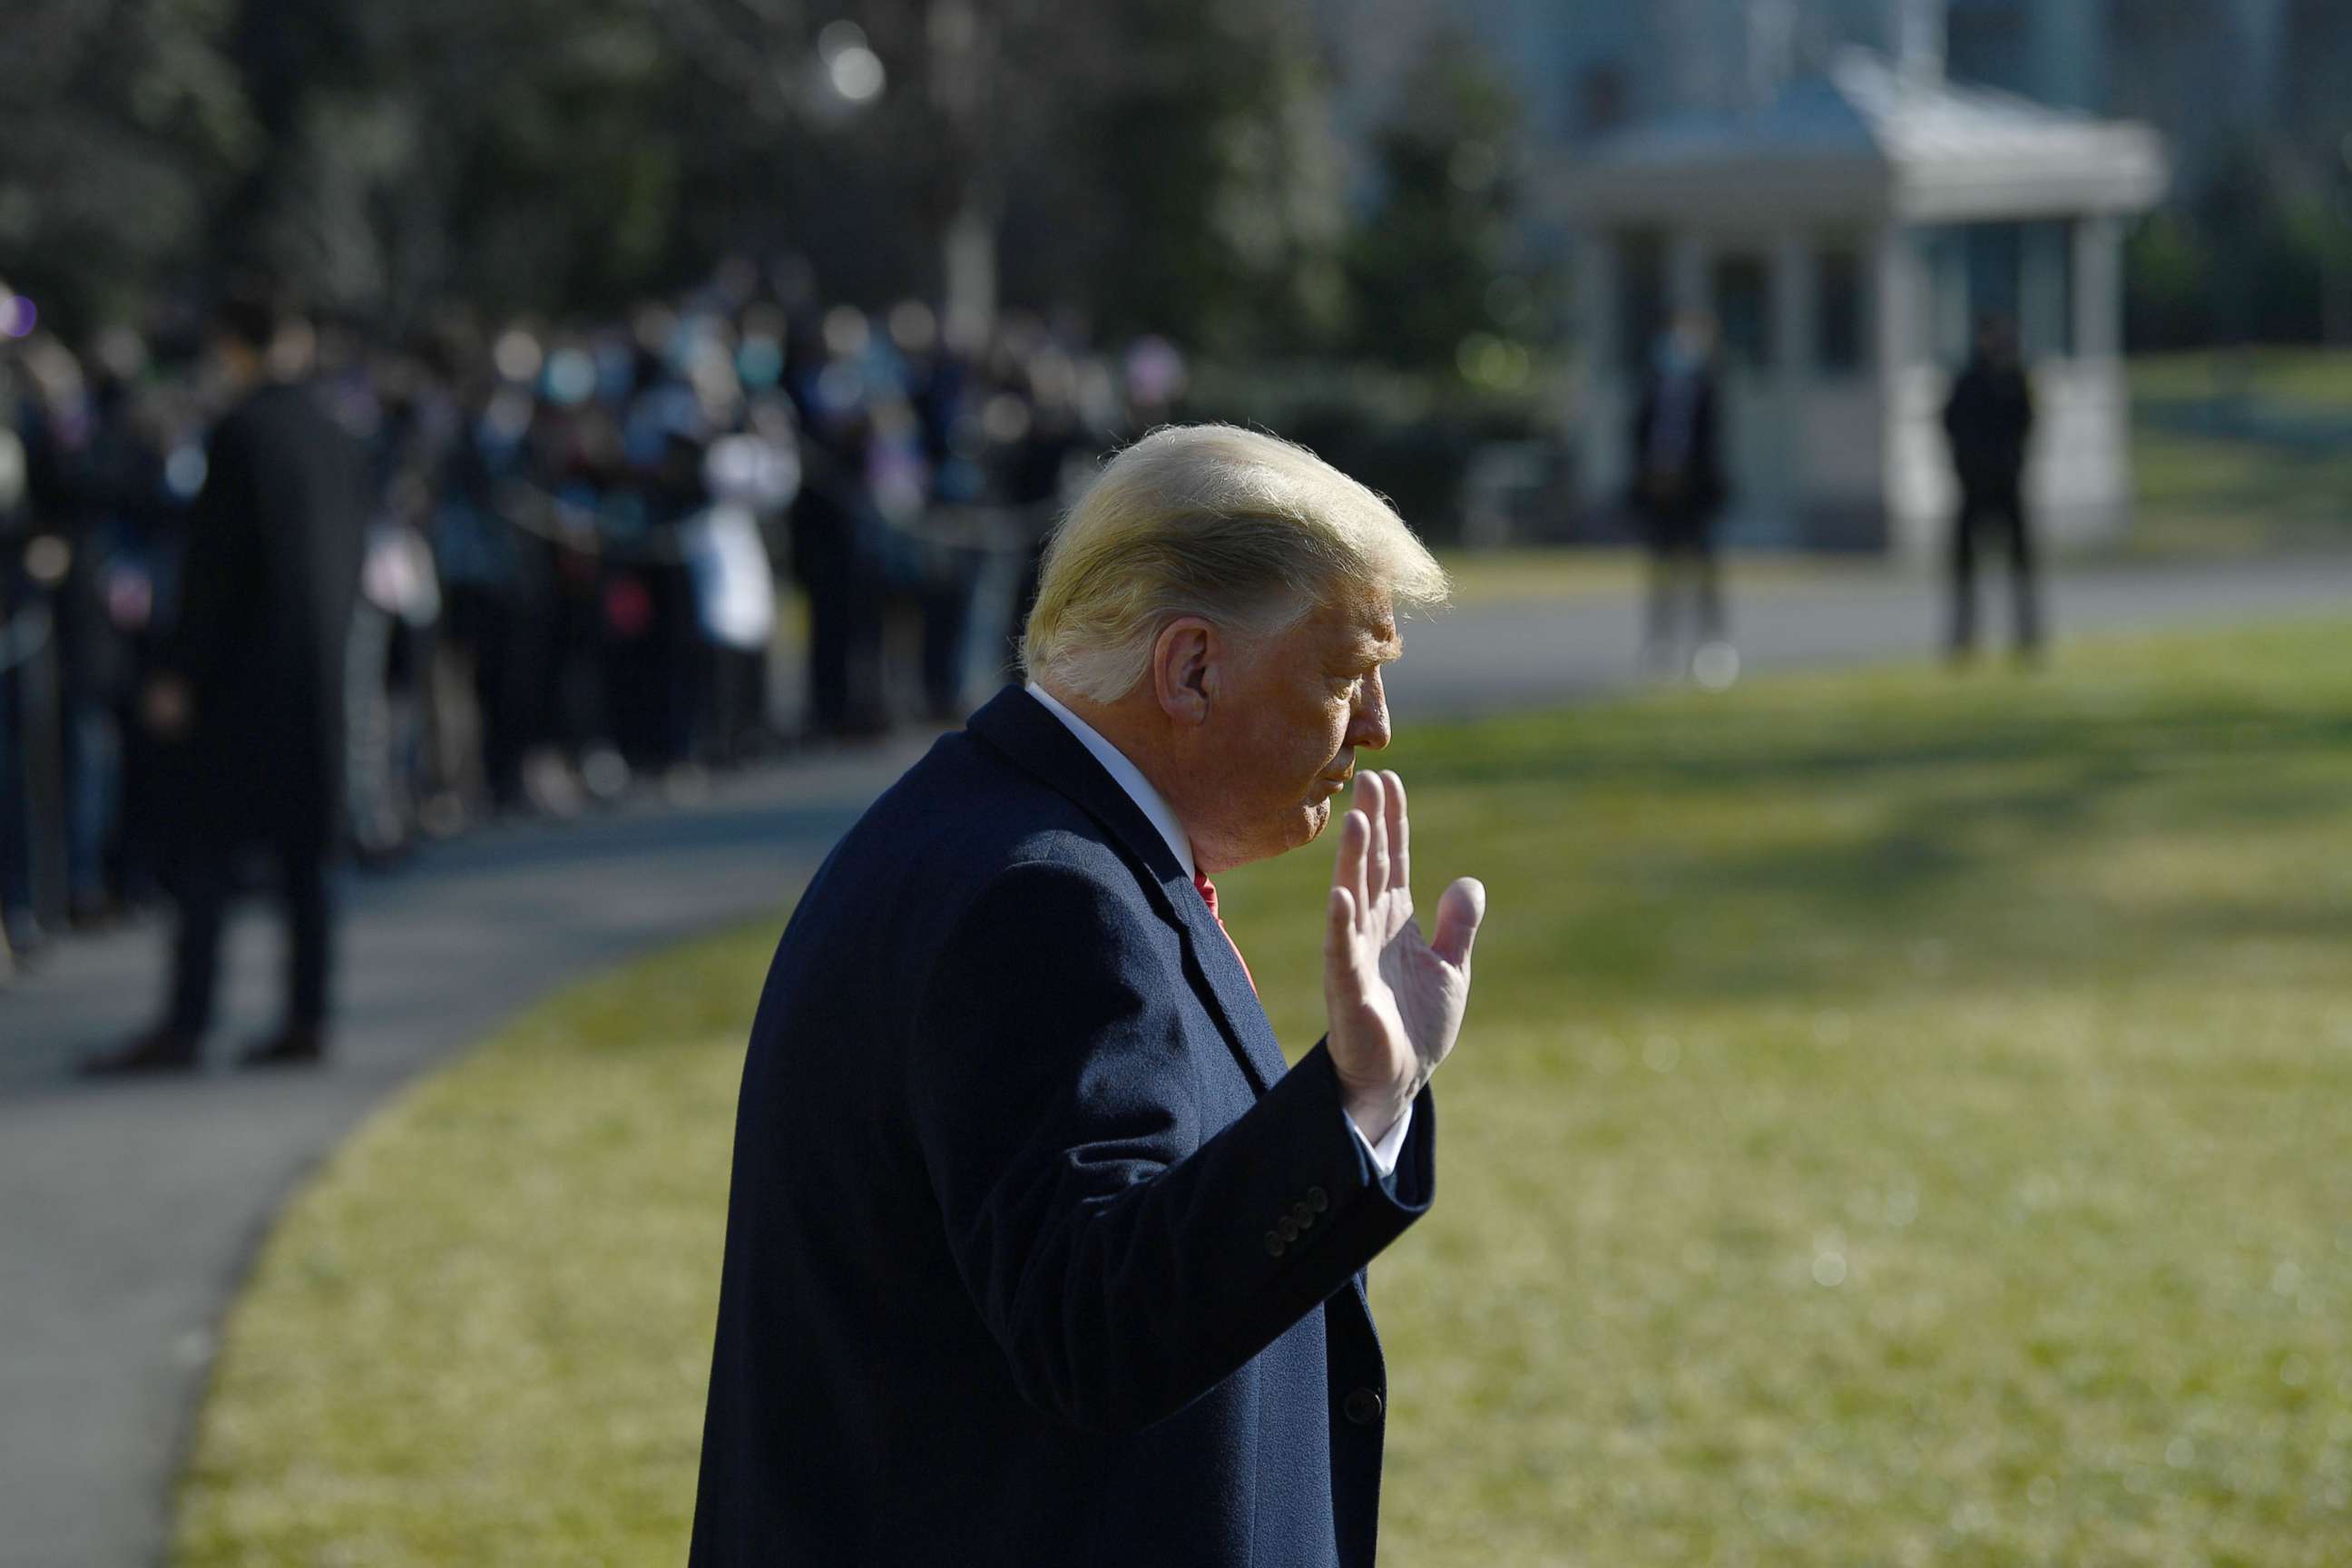 PHOTO: In this Jan. 12, 2021, file photo, President Donald Trump waves to the media outside the White House Washington, D.C., before his departure to Alamo, Texas.